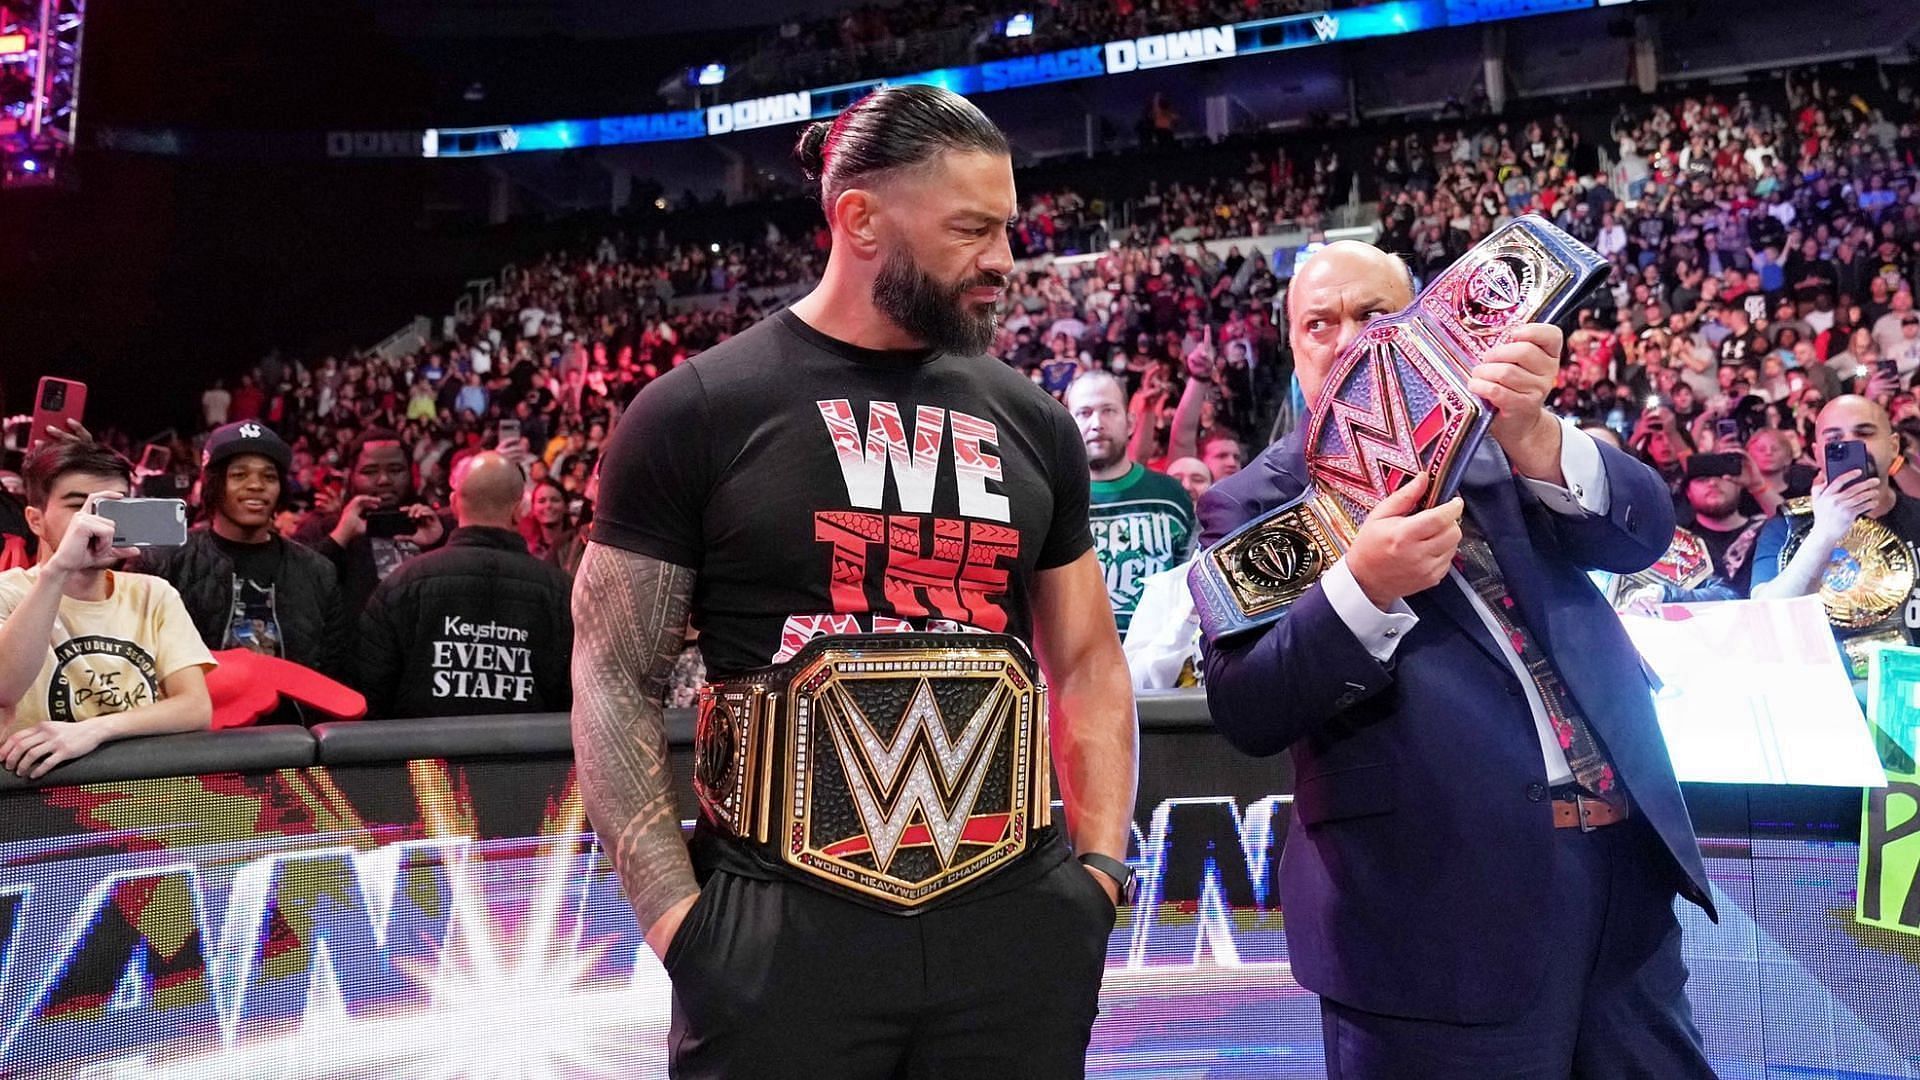 Roman Reigns has been the biggest star for 2 years